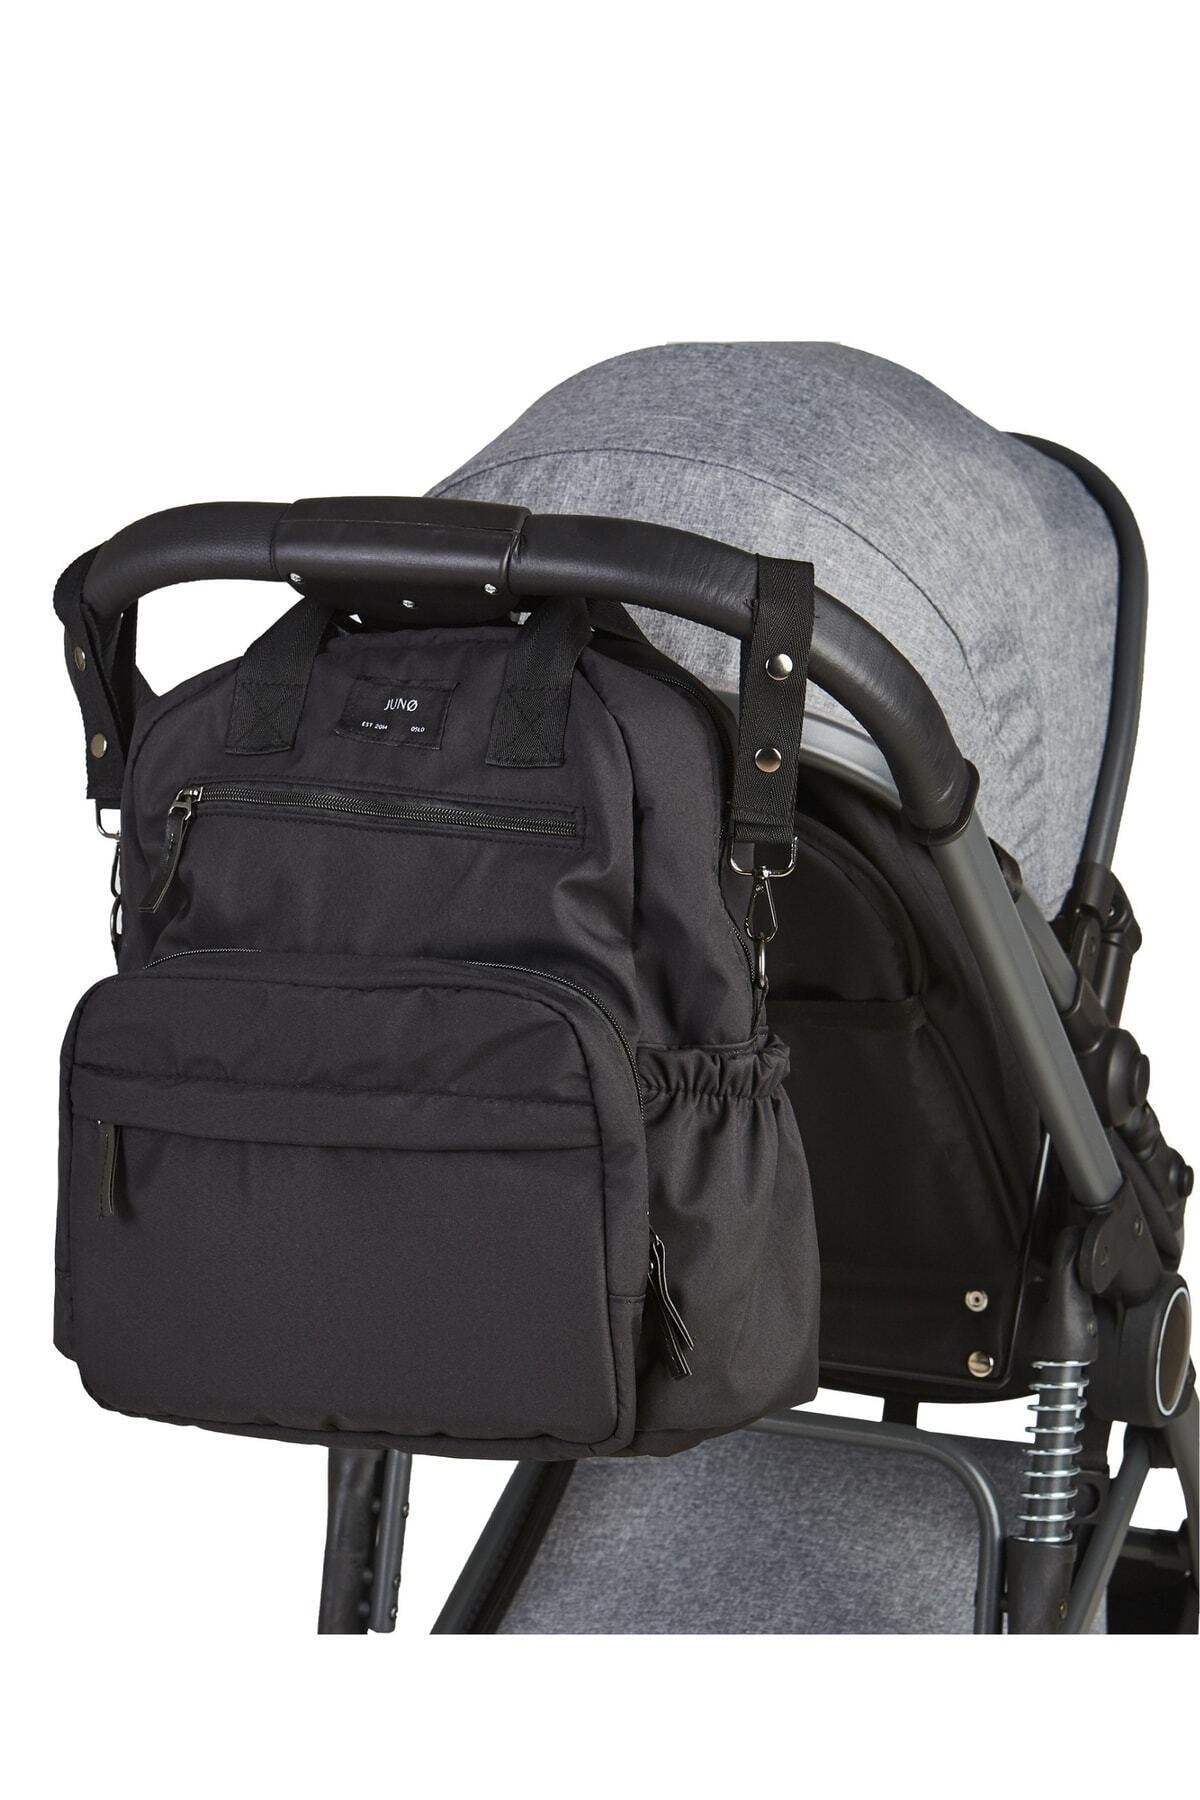 Oslo Mother Baby Care Bag